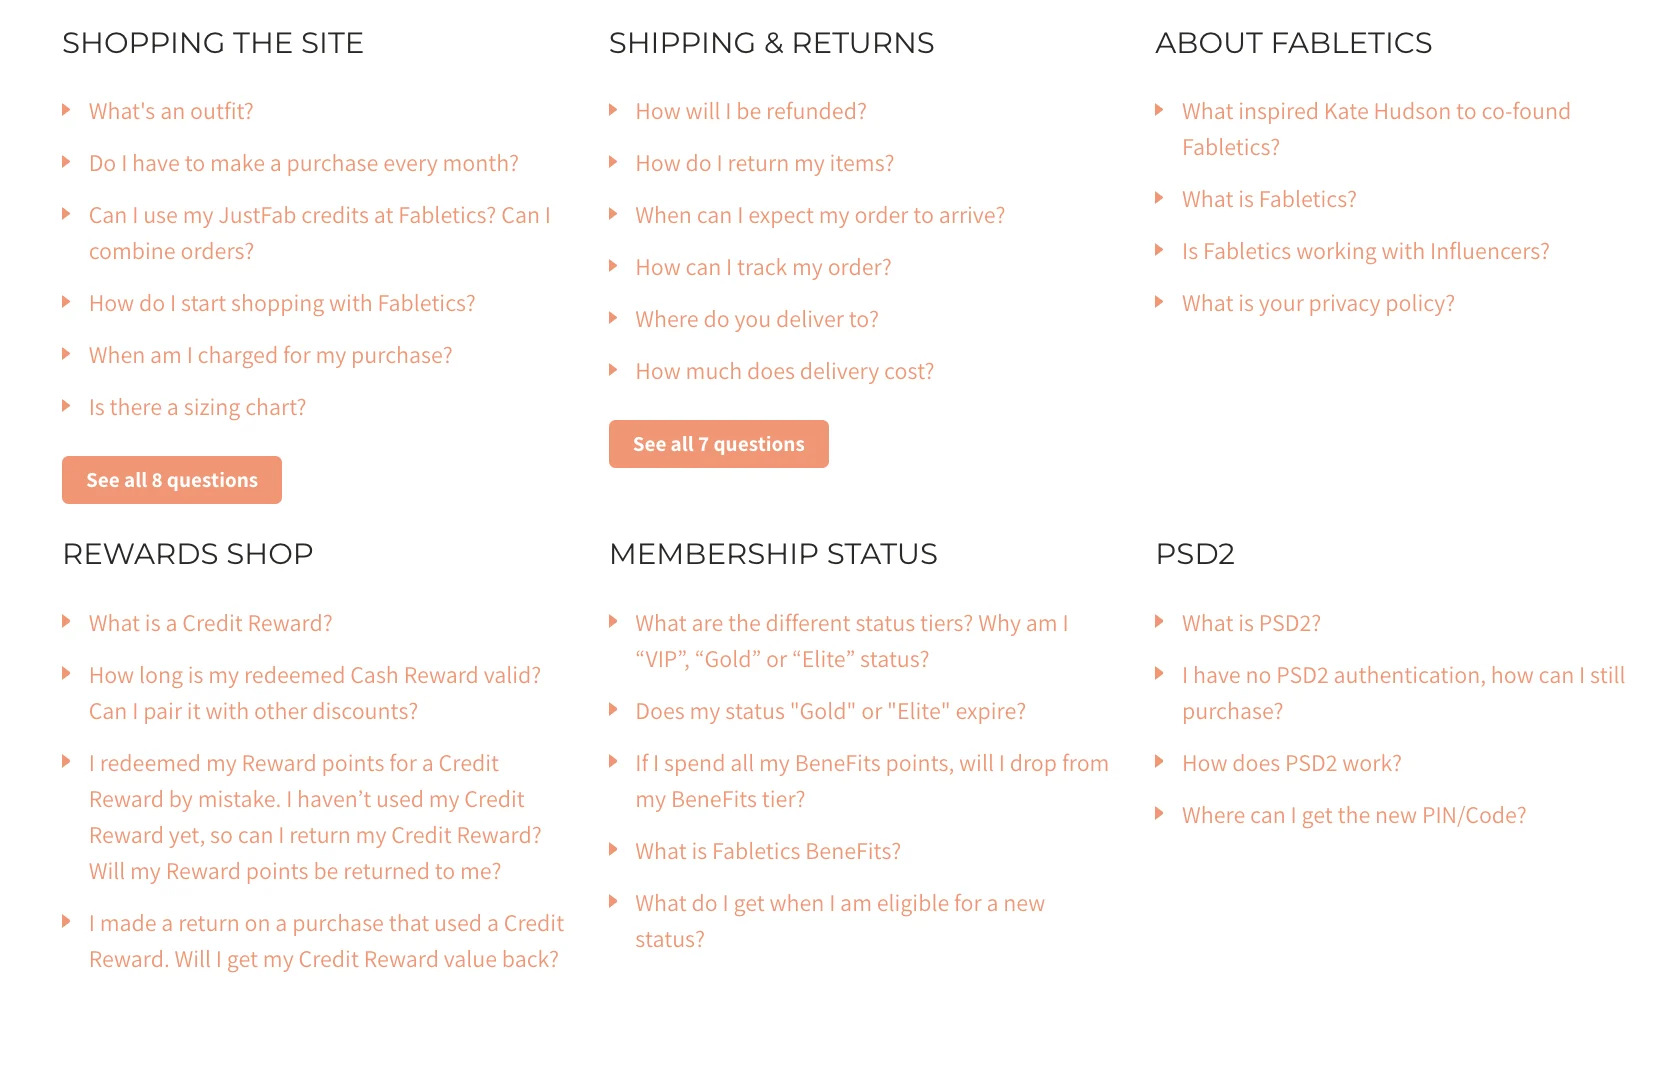 Fabletics organise their FAQ page by category